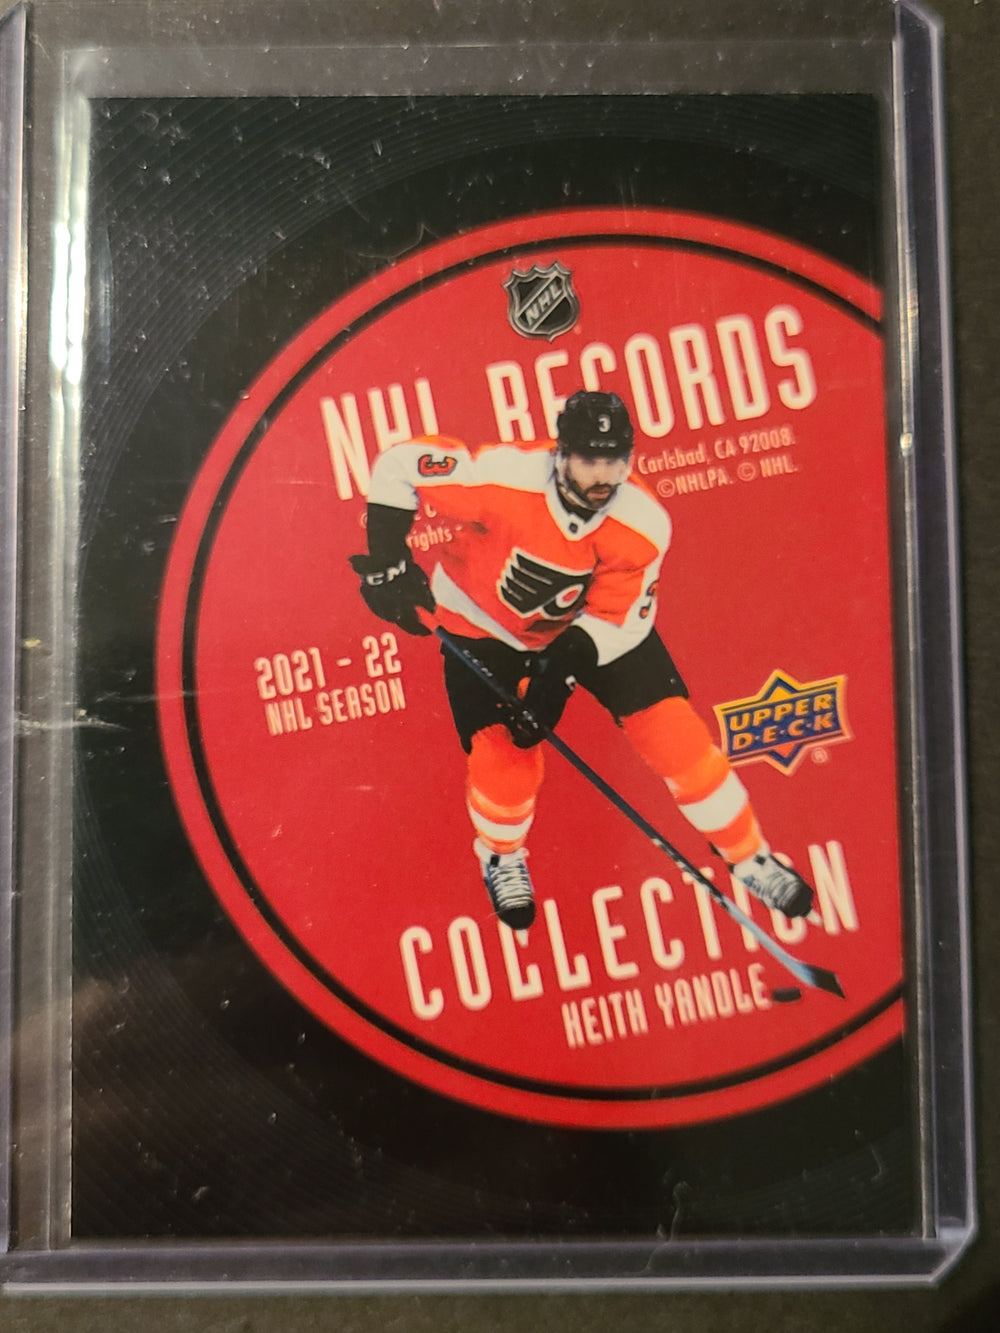 2021-22 Upper Deck Extended NHL Records Collection #RB-14 Keith Yandle Philadelphia Flyers